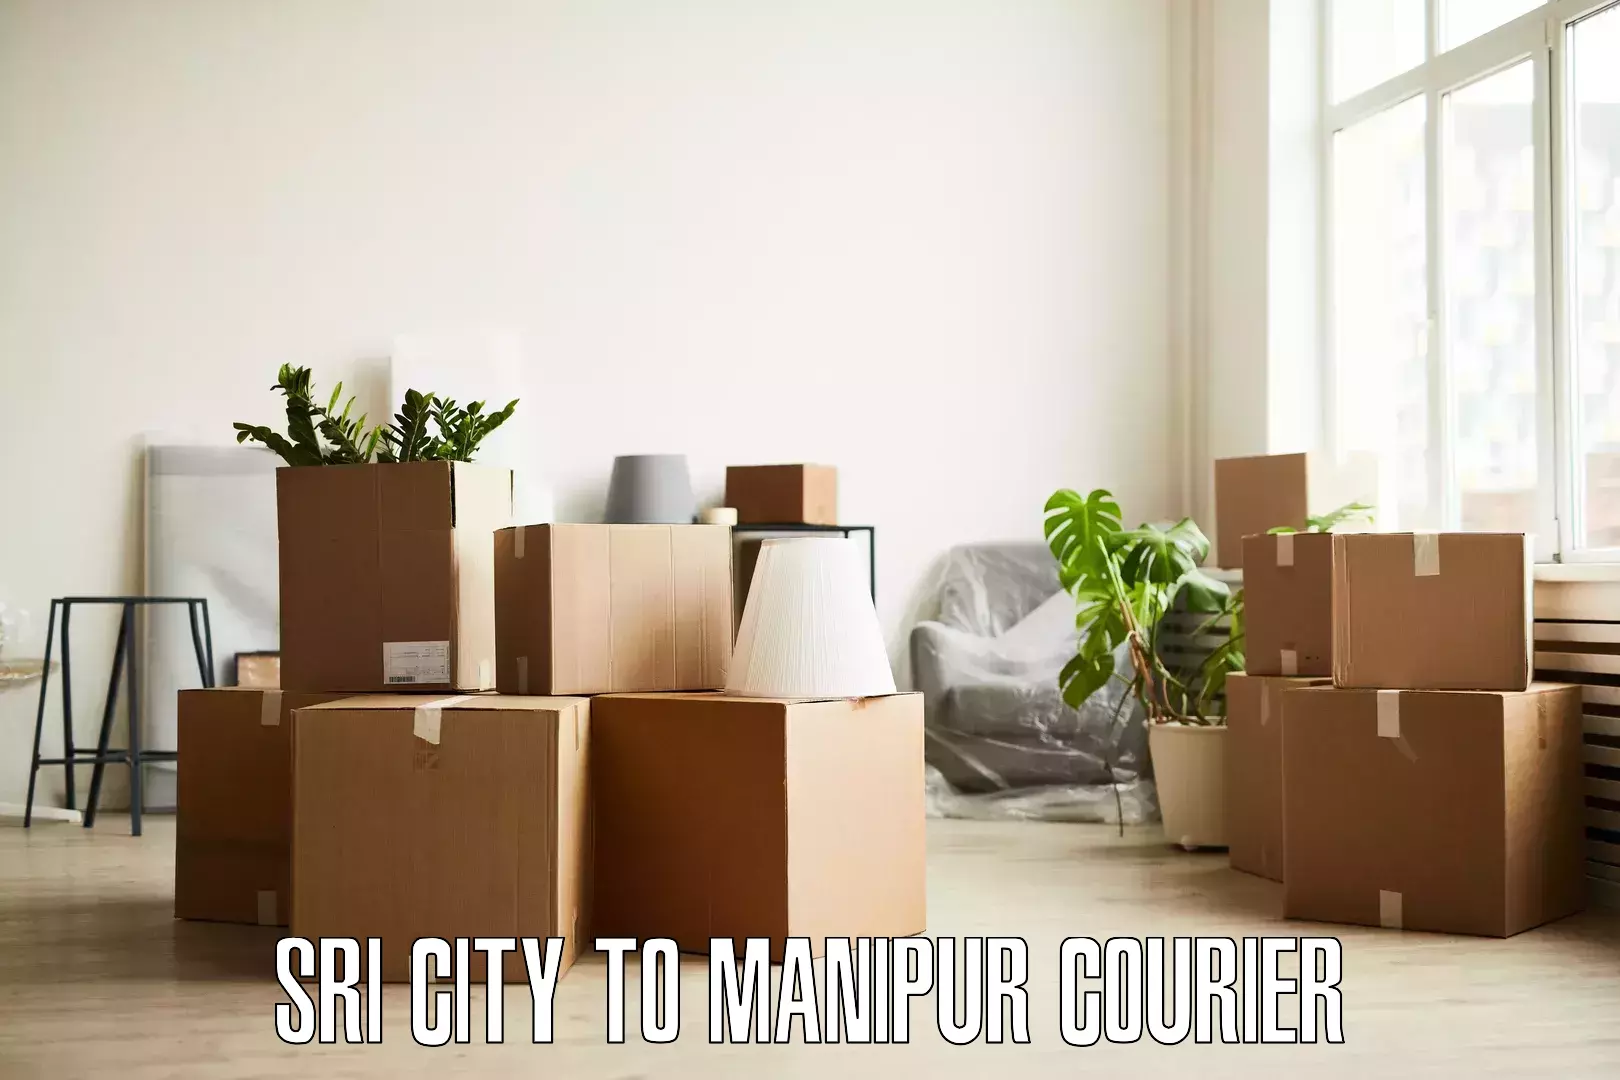 Reliable moving assistance Sri City to Moirang